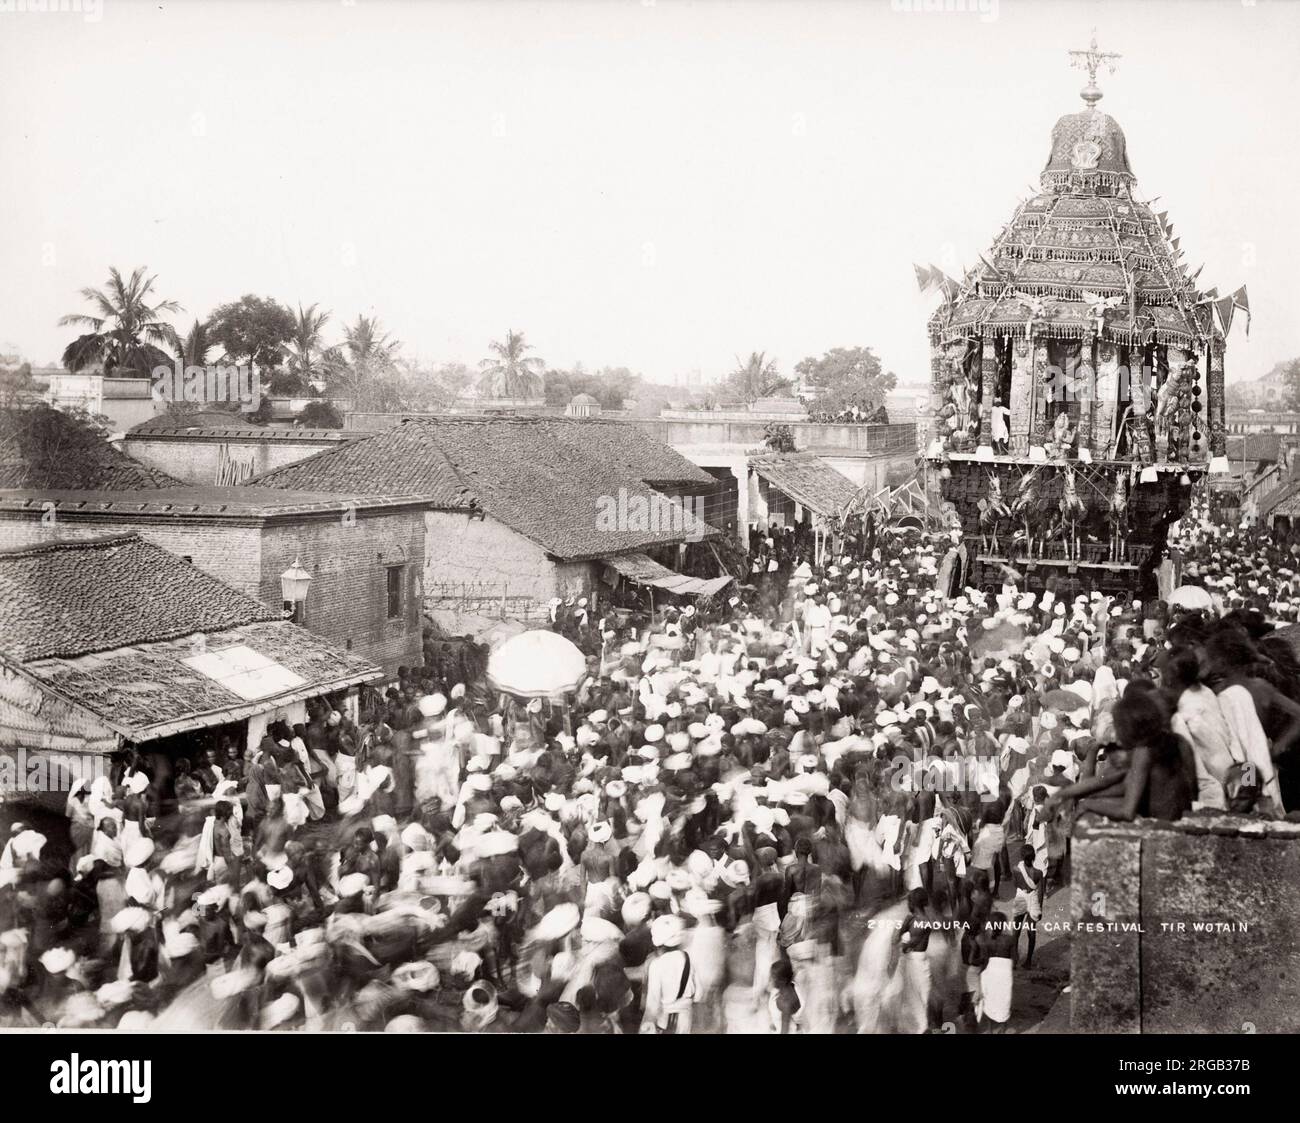 Vintage 19th century photograph: annual car festival, Madura, India. Chithirai Festival or Chithirai Thiruvizha is an annual celebration celebrated in the city of Madurai during the month of April. Stock Photo